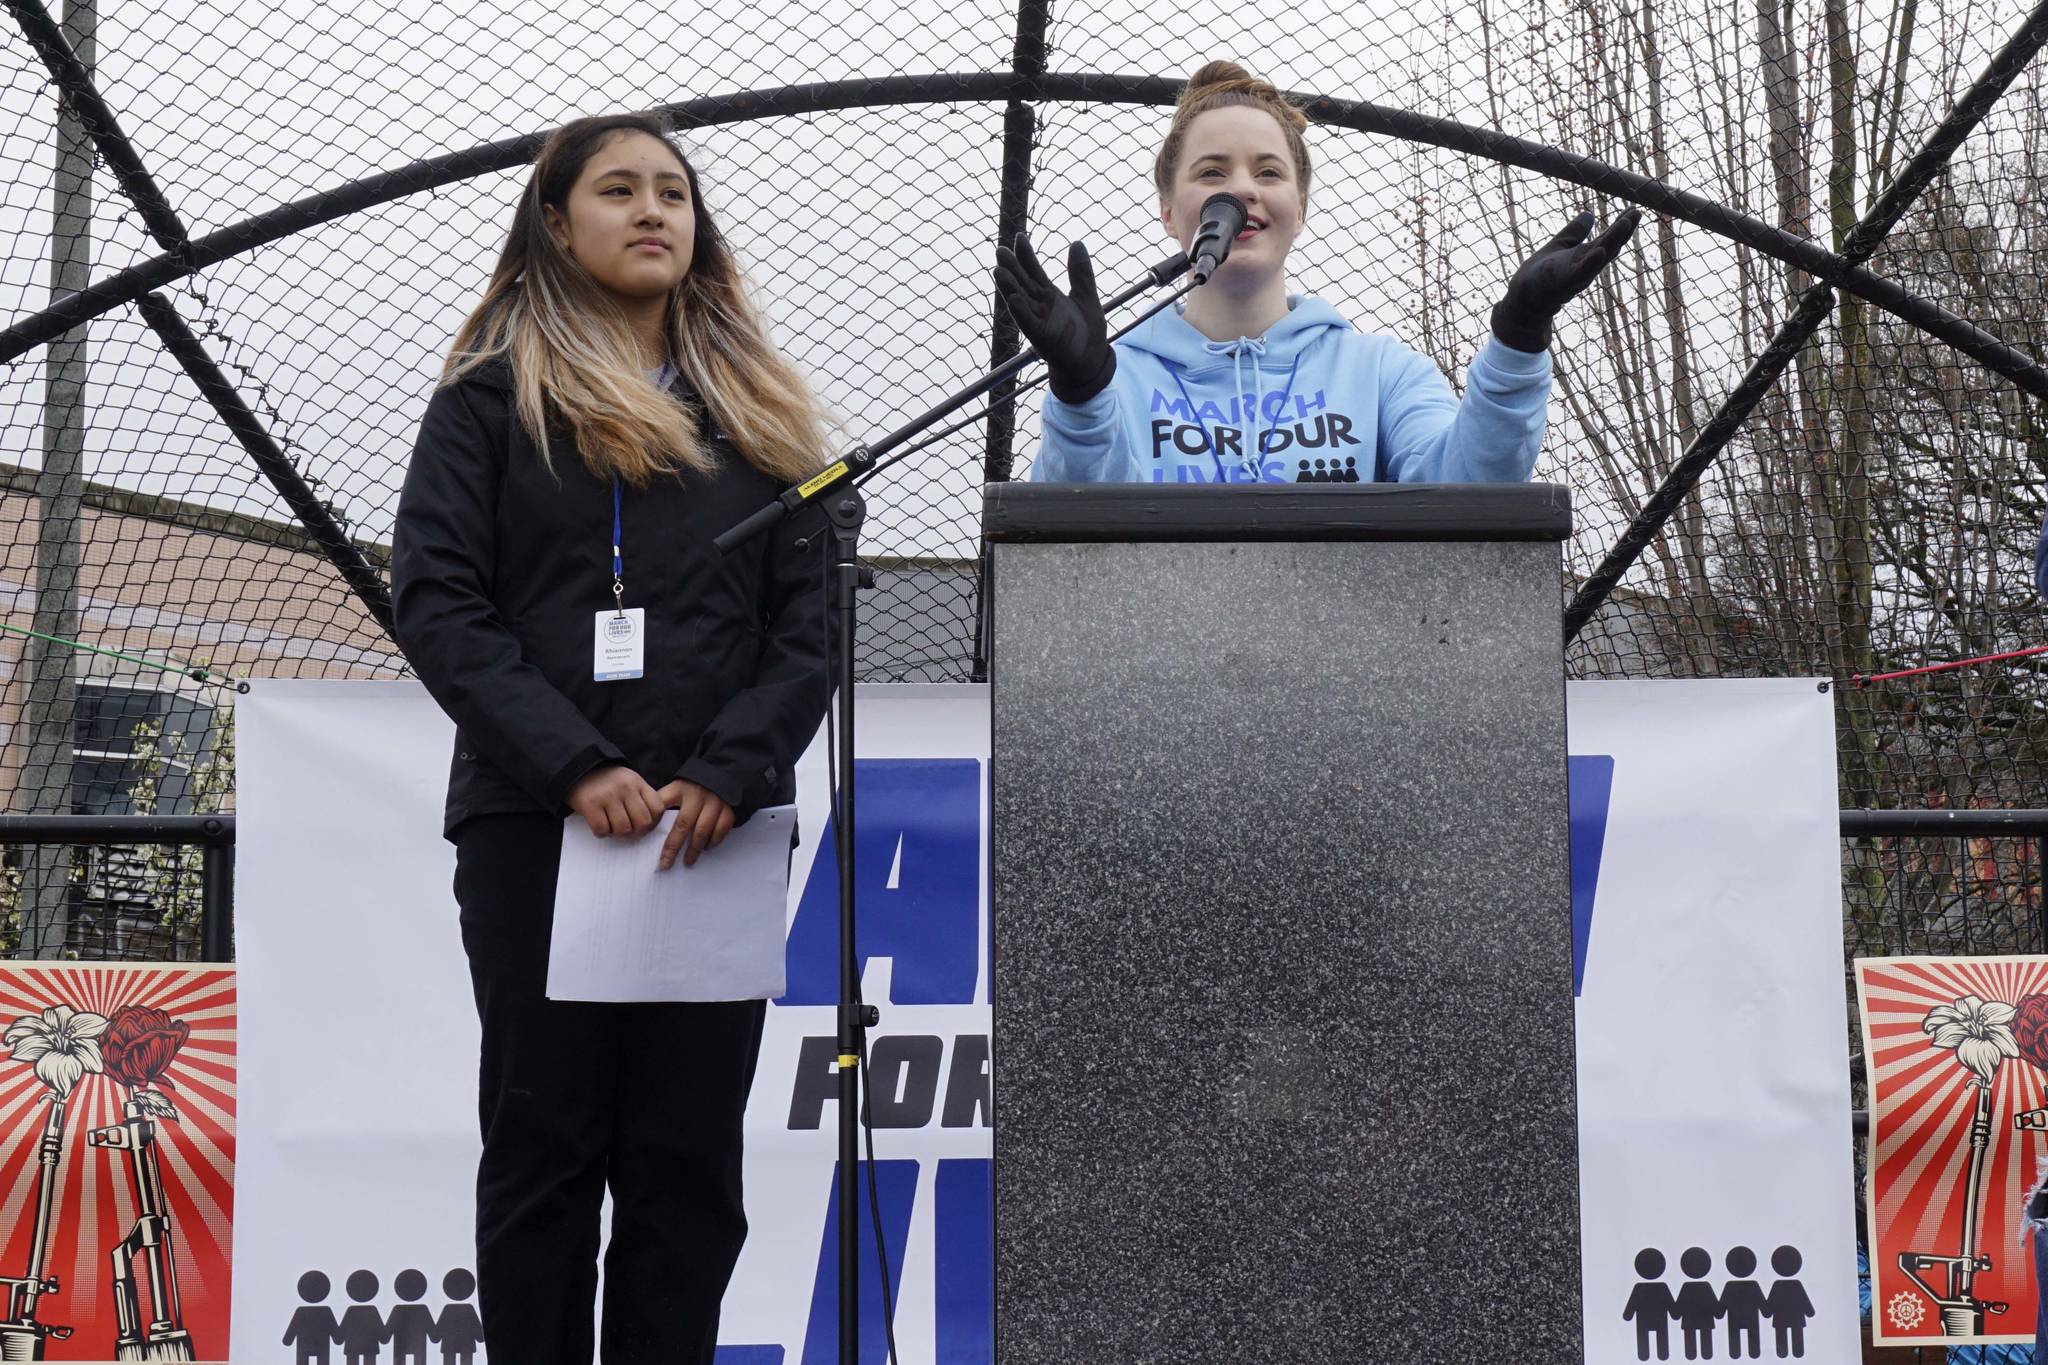 March for Our Lives Seattle founders Emilia Allard (right) and Rhiannon Rasaretnam (left) spoke at the rally on March 24, 2018. Photo by Melissa Hellmann